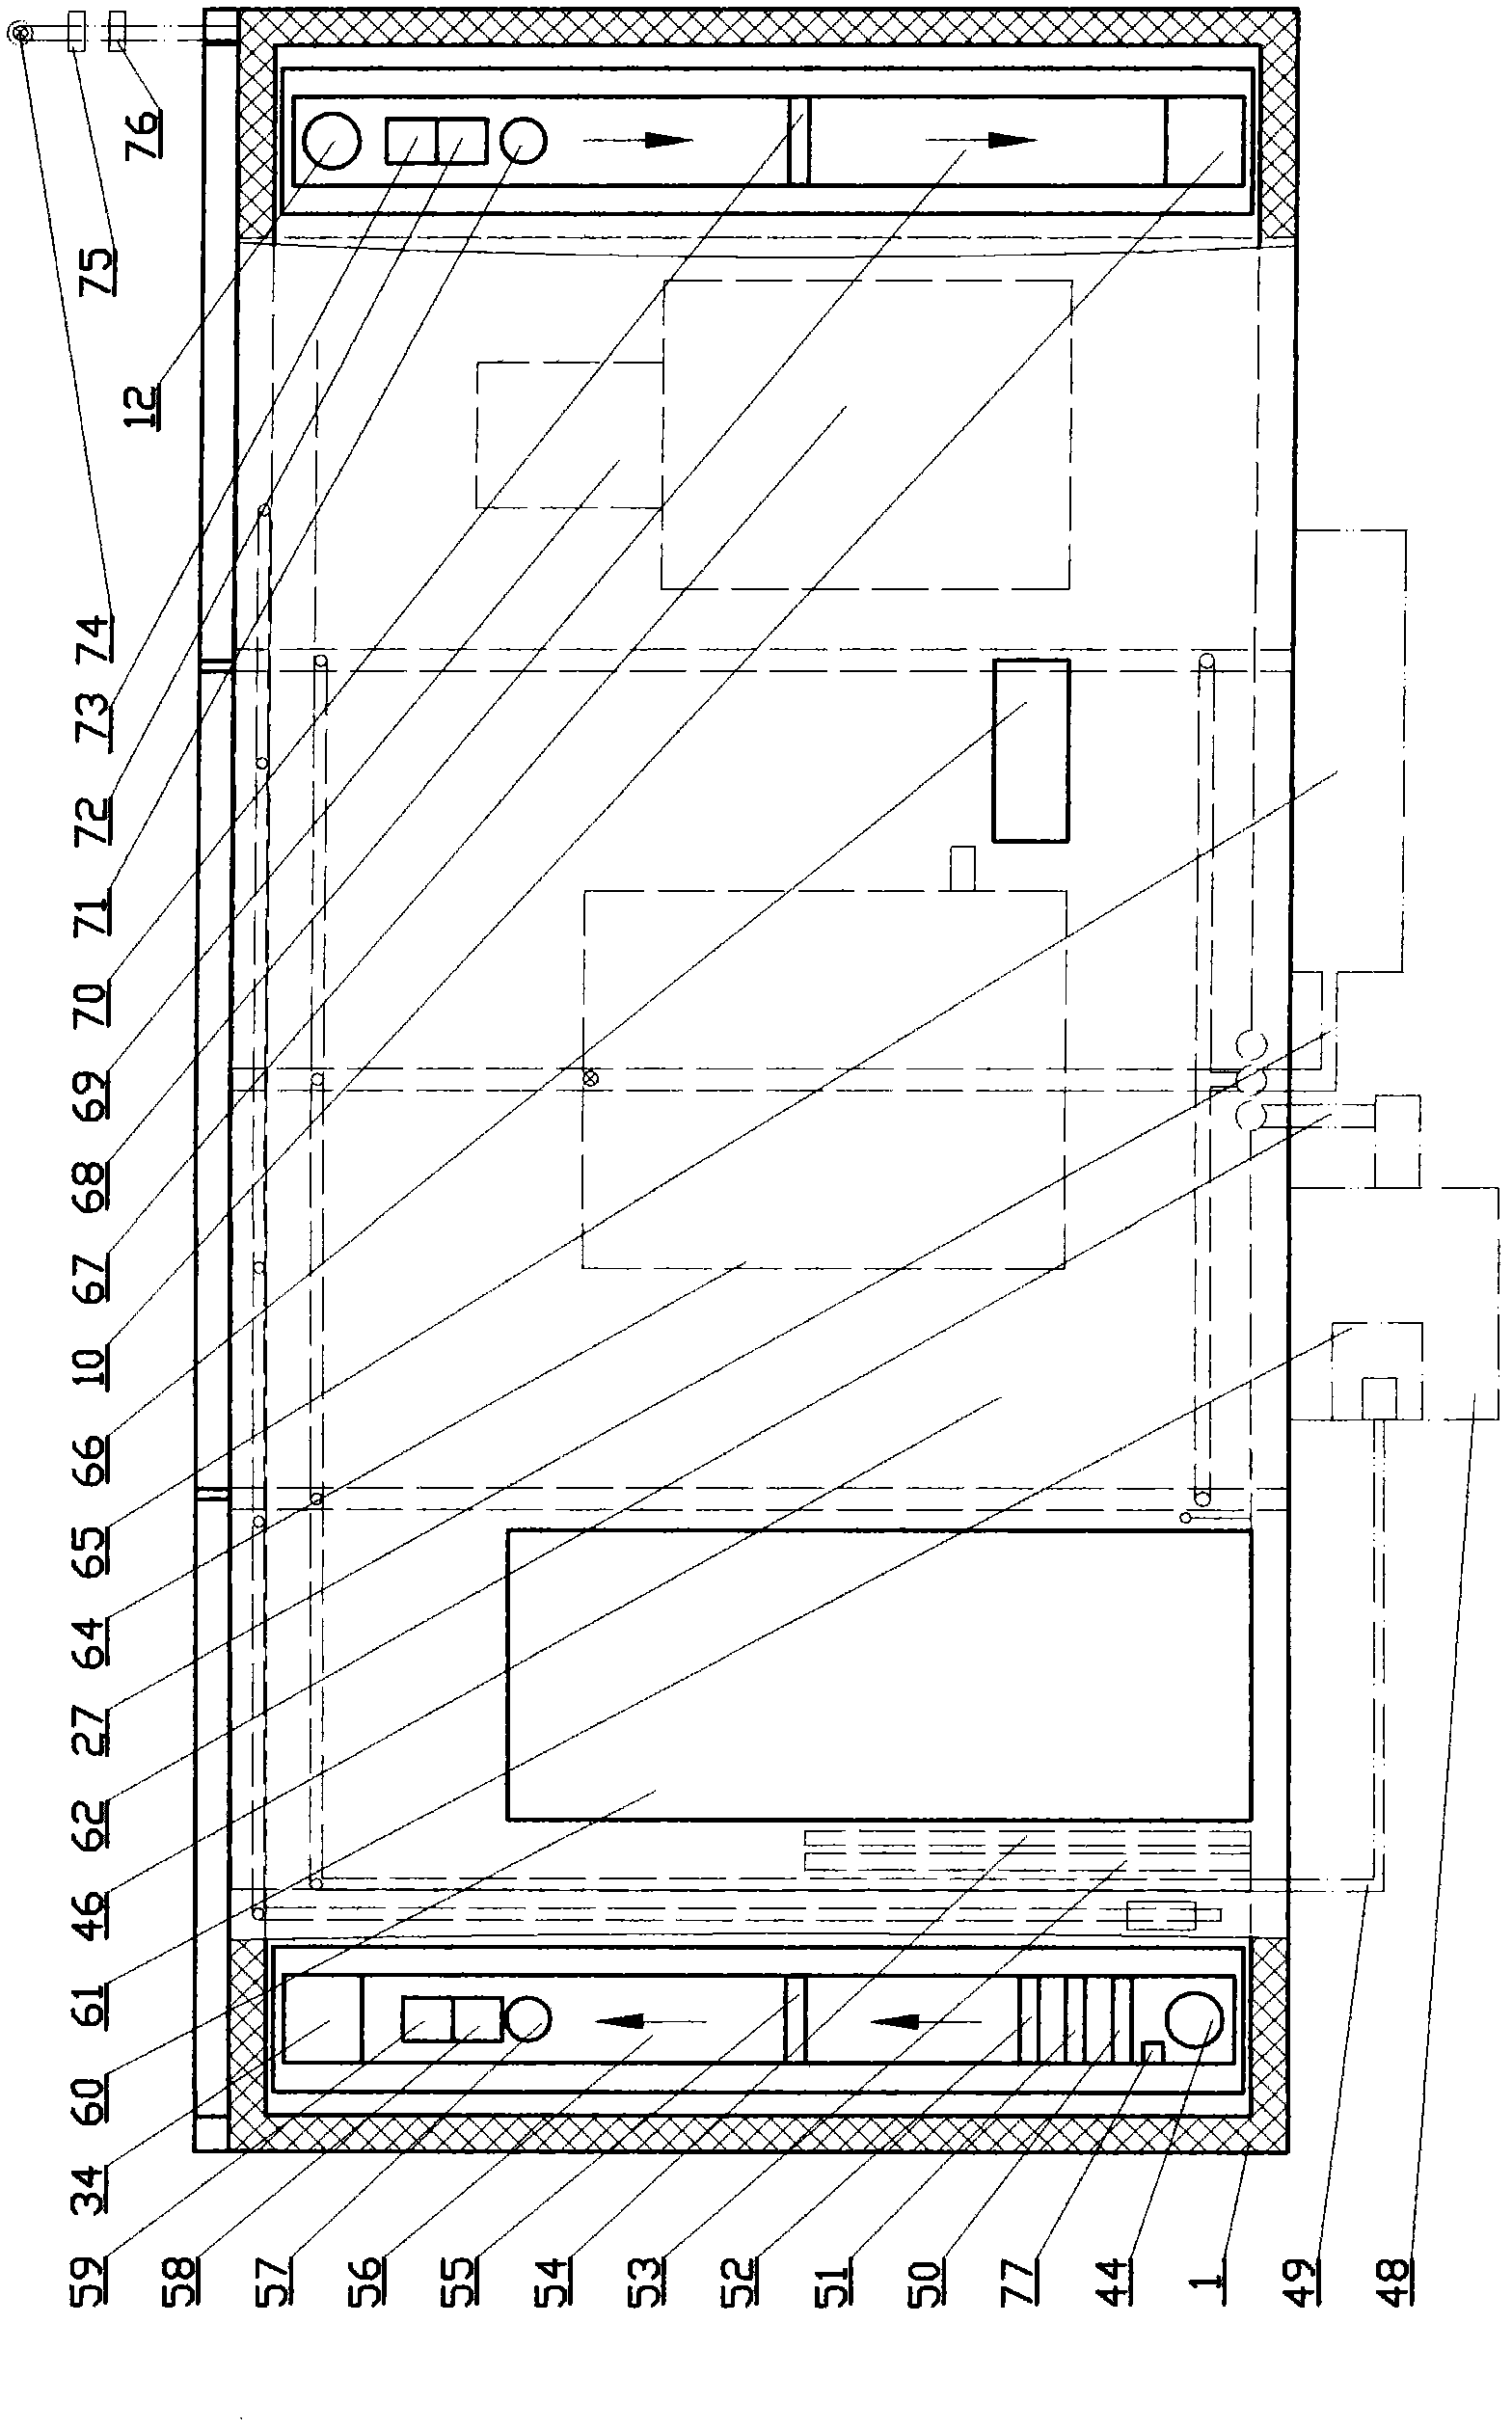 Full-numerical-control track-type seeding culturing device